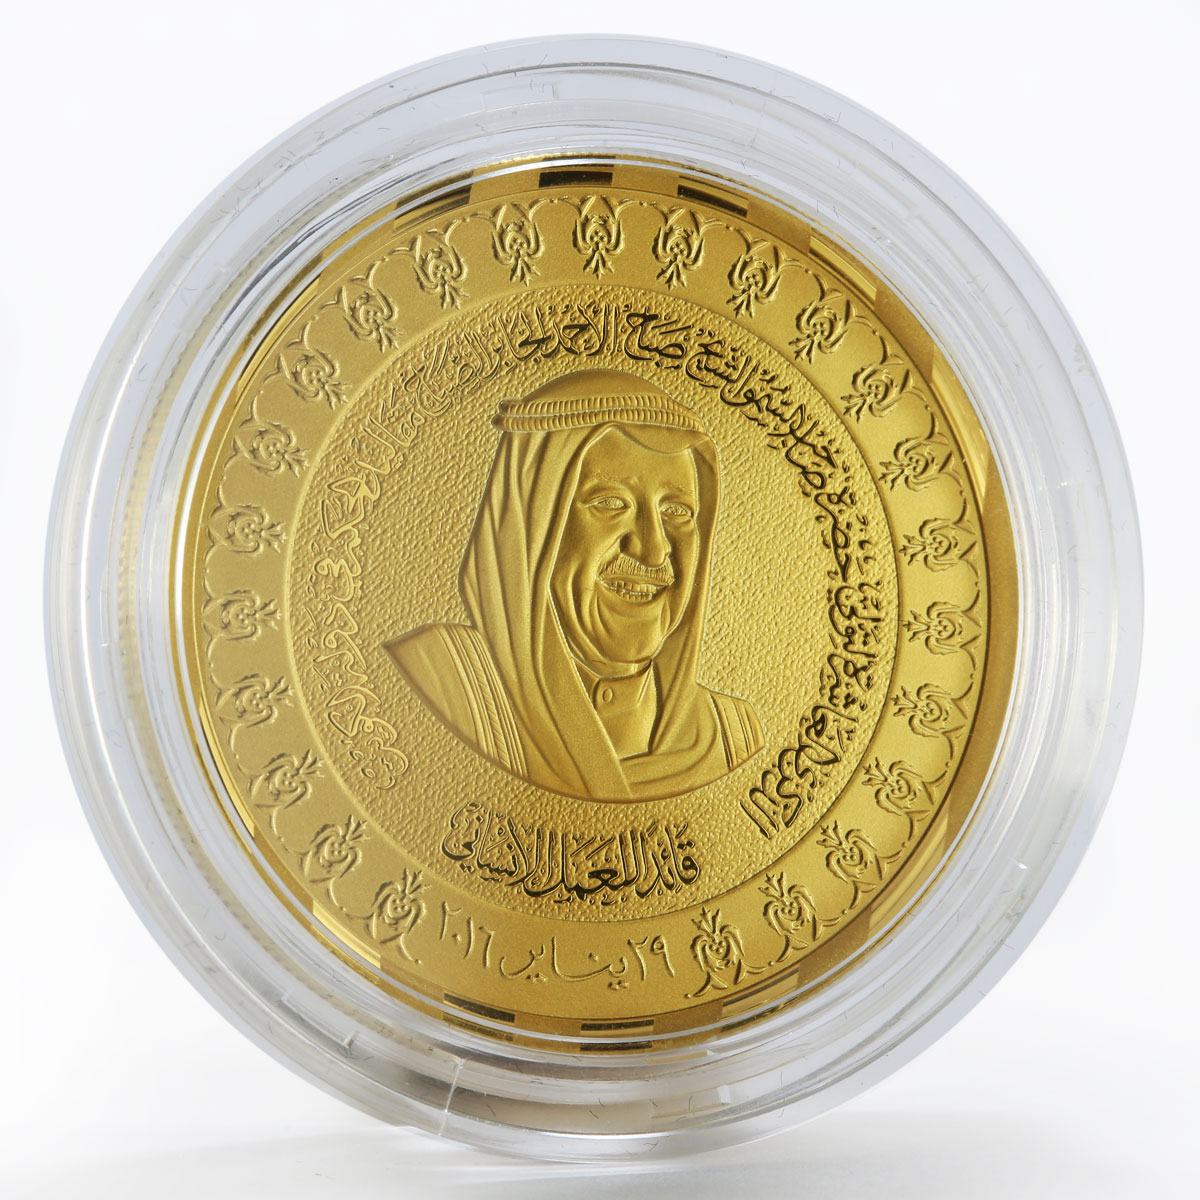 Kuwait 5 dinars 10th Anniversary of Sheikh Sabah goldplated silver coin 2016